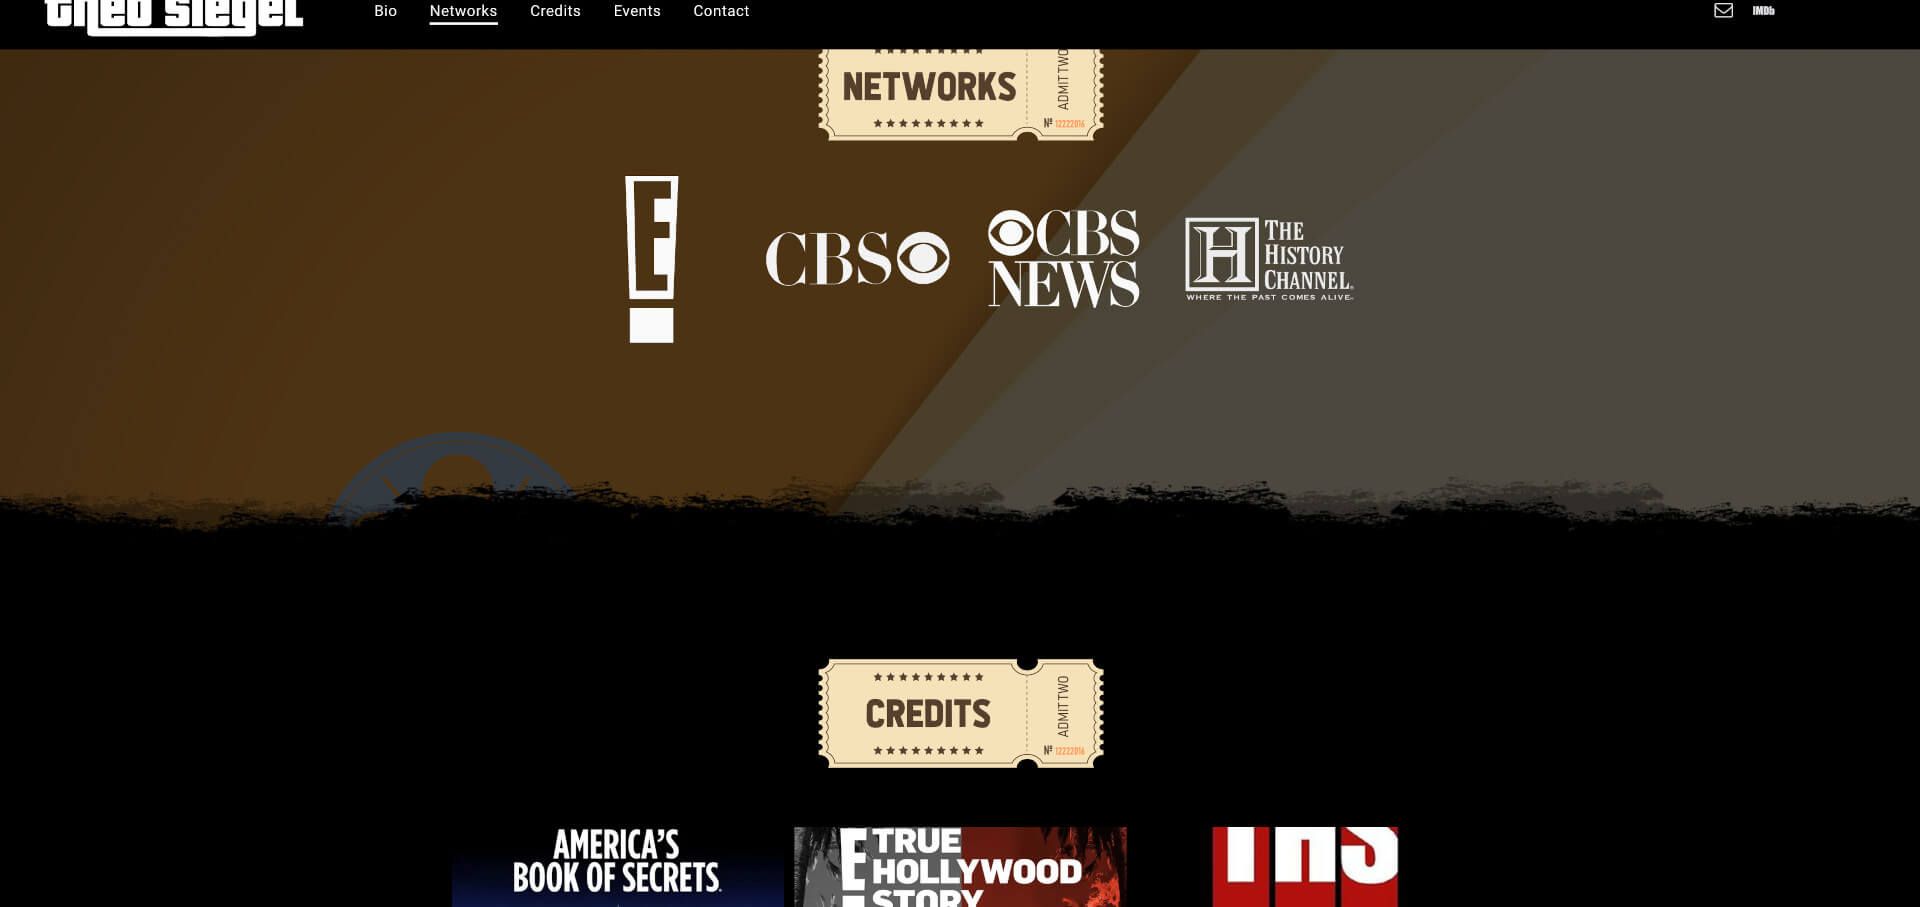 Theo Siegel - Networks & Credits (Designed by Silver Daniels Studios)